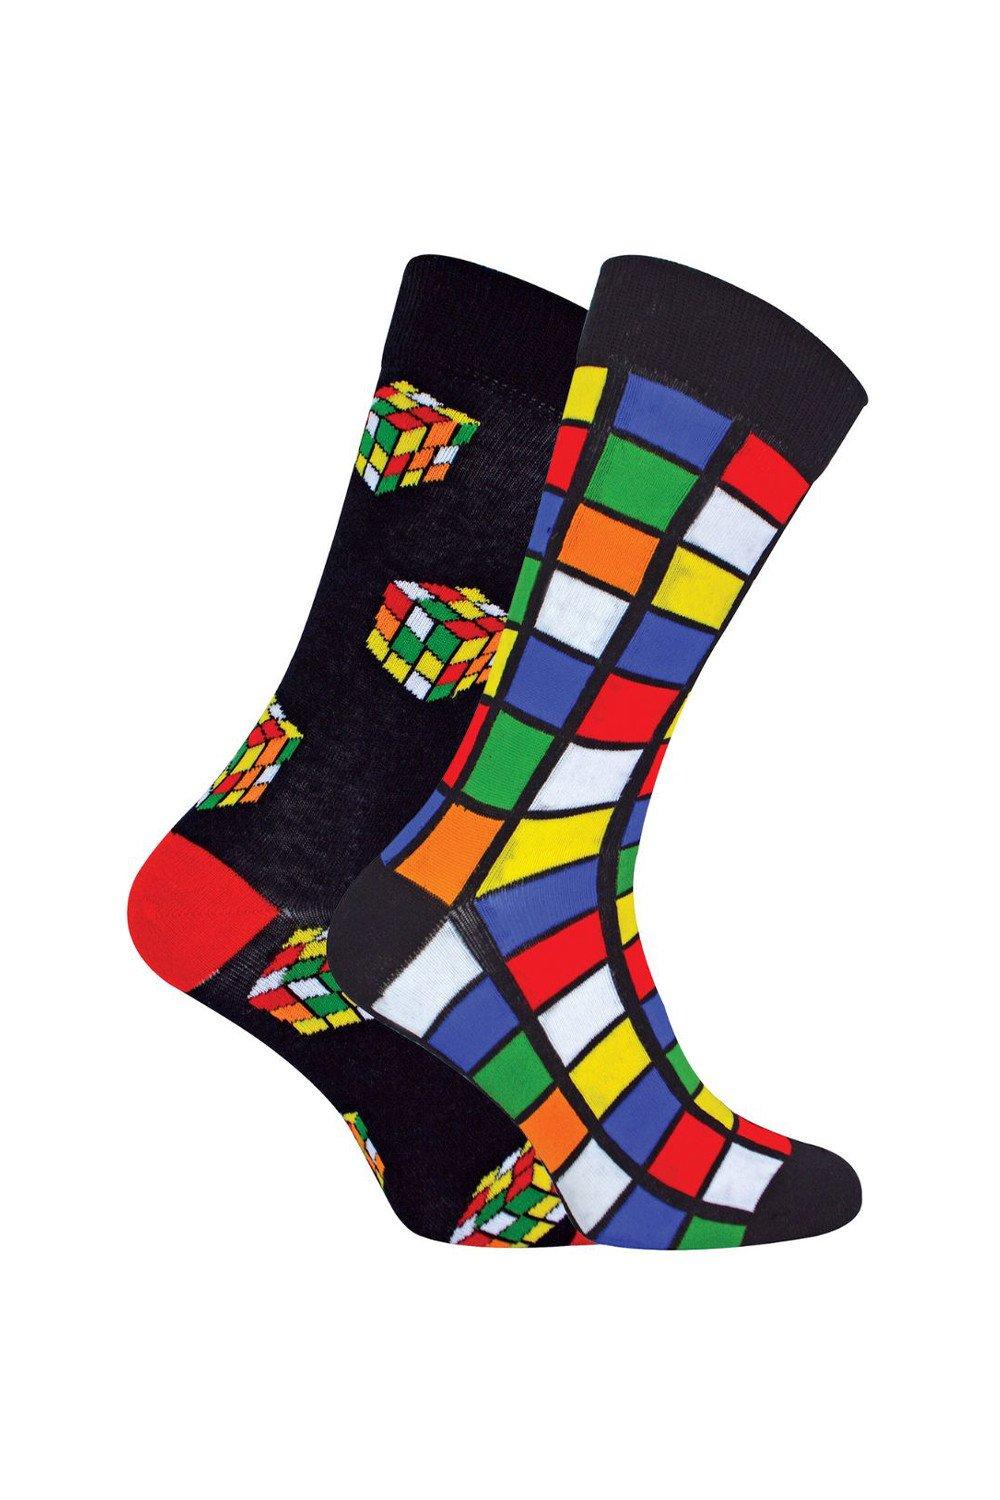 Novelty Comfy Rubiks Cube Design Cotton Socks in a Gift Box